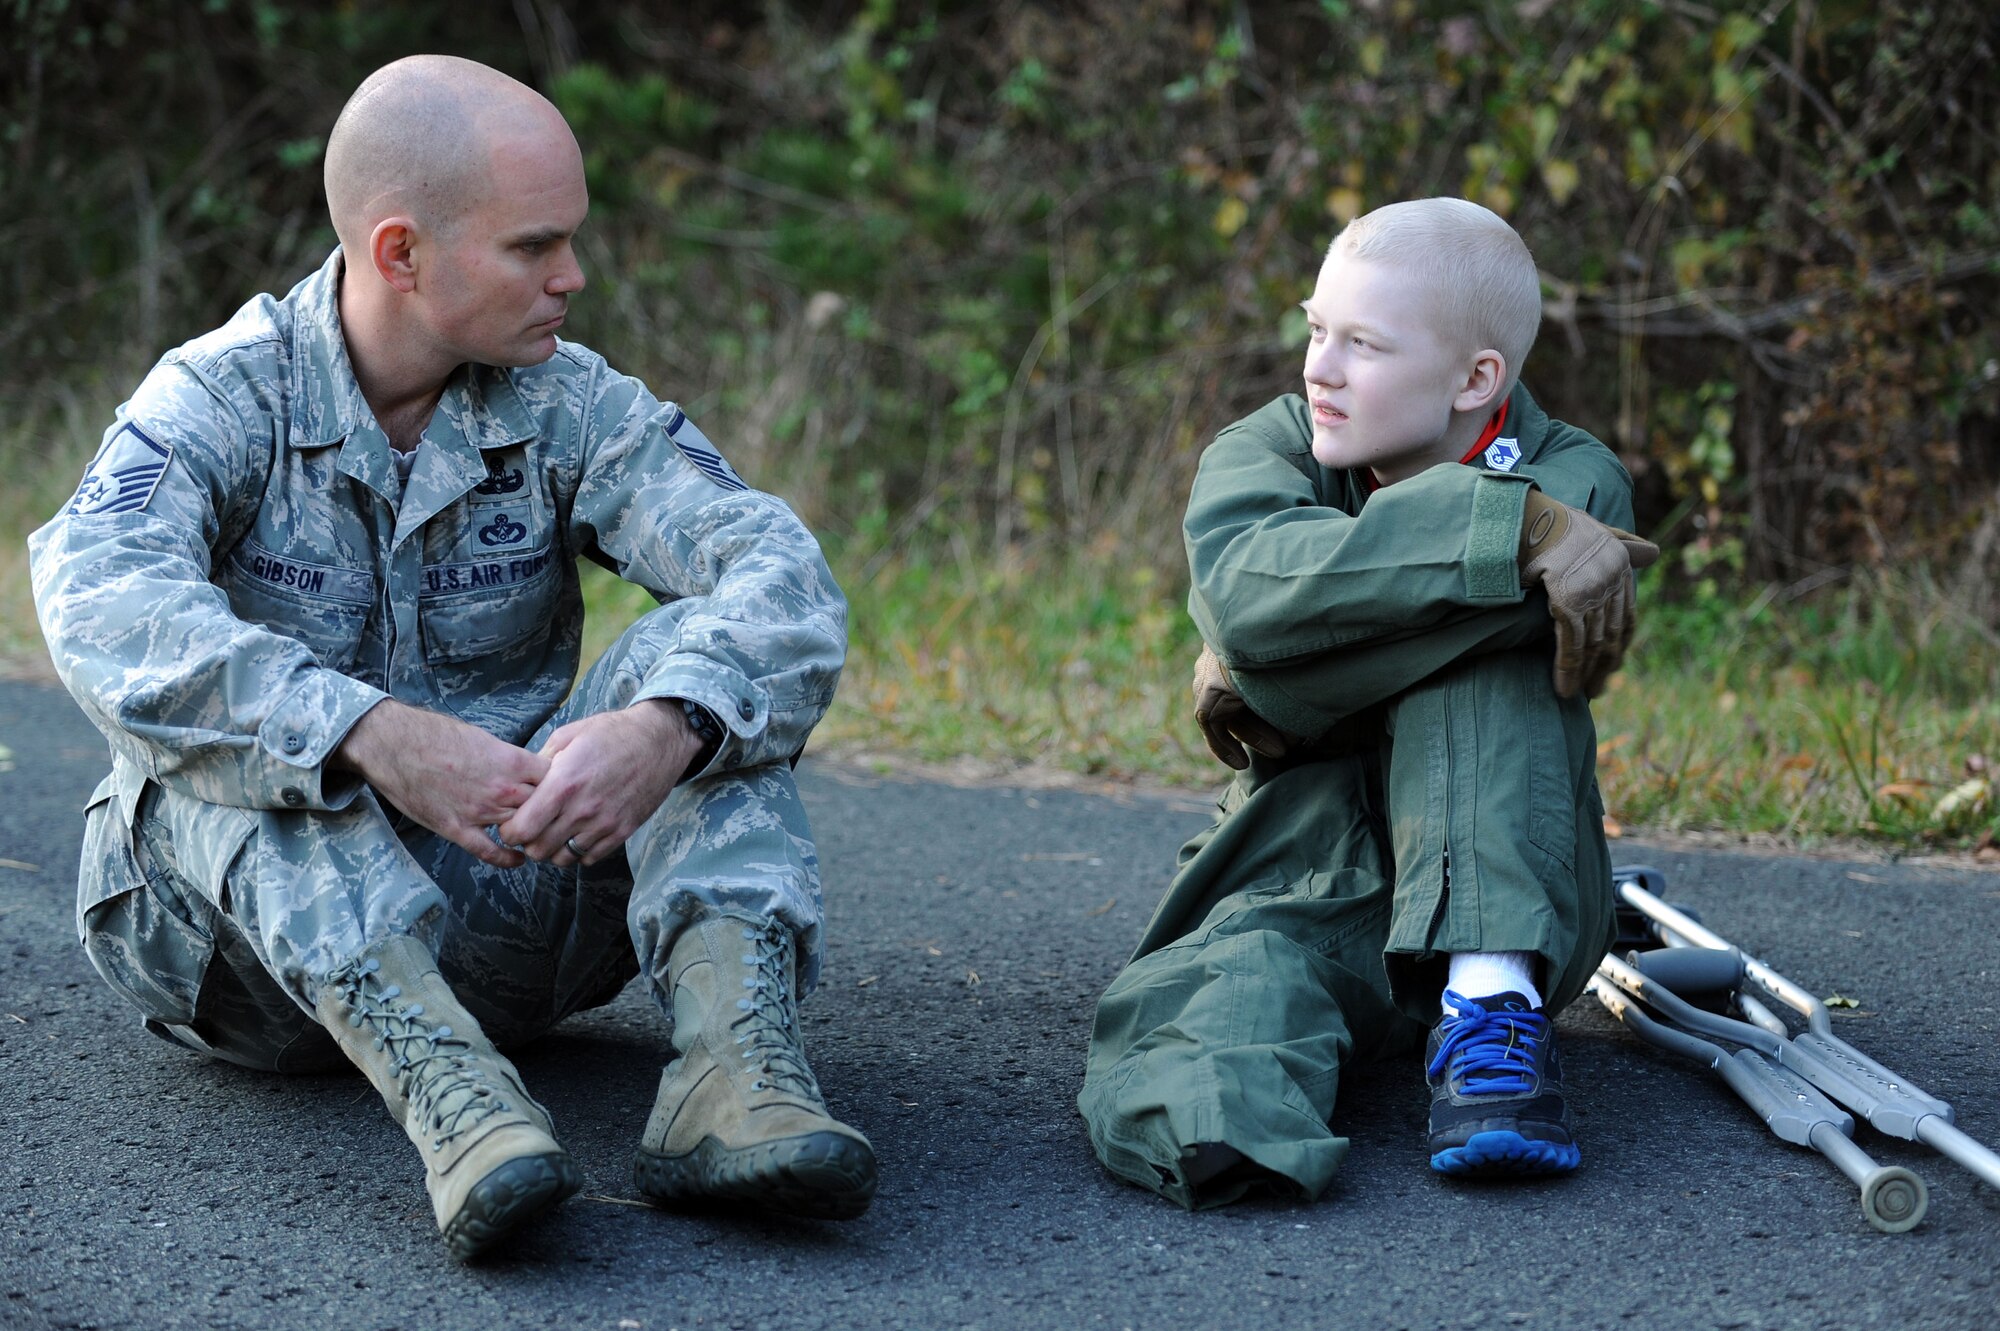 Master Sgt. Cary Gibson, 35th Civil Engineer Squadron explosive ordnance disposal flight chief, takes a moment to mentor 17-year-old Jonah Skrove at Misawa Air Base, Japan, Nov. 6, 2013. After being diagnosed with osteosarcoma, Jonah was granted a wish by the Make-A-Wish Foundation. Instead of wishing to meet a famous actor or sports player, Jonah wished to see his brother who is stationed here. Members of several base agencies, like EOD, took time out of their schedule to share their mission with the Skrove family. (U.S. Air Force photo by Staff Sgt. Alyssa C. Wallace/released)